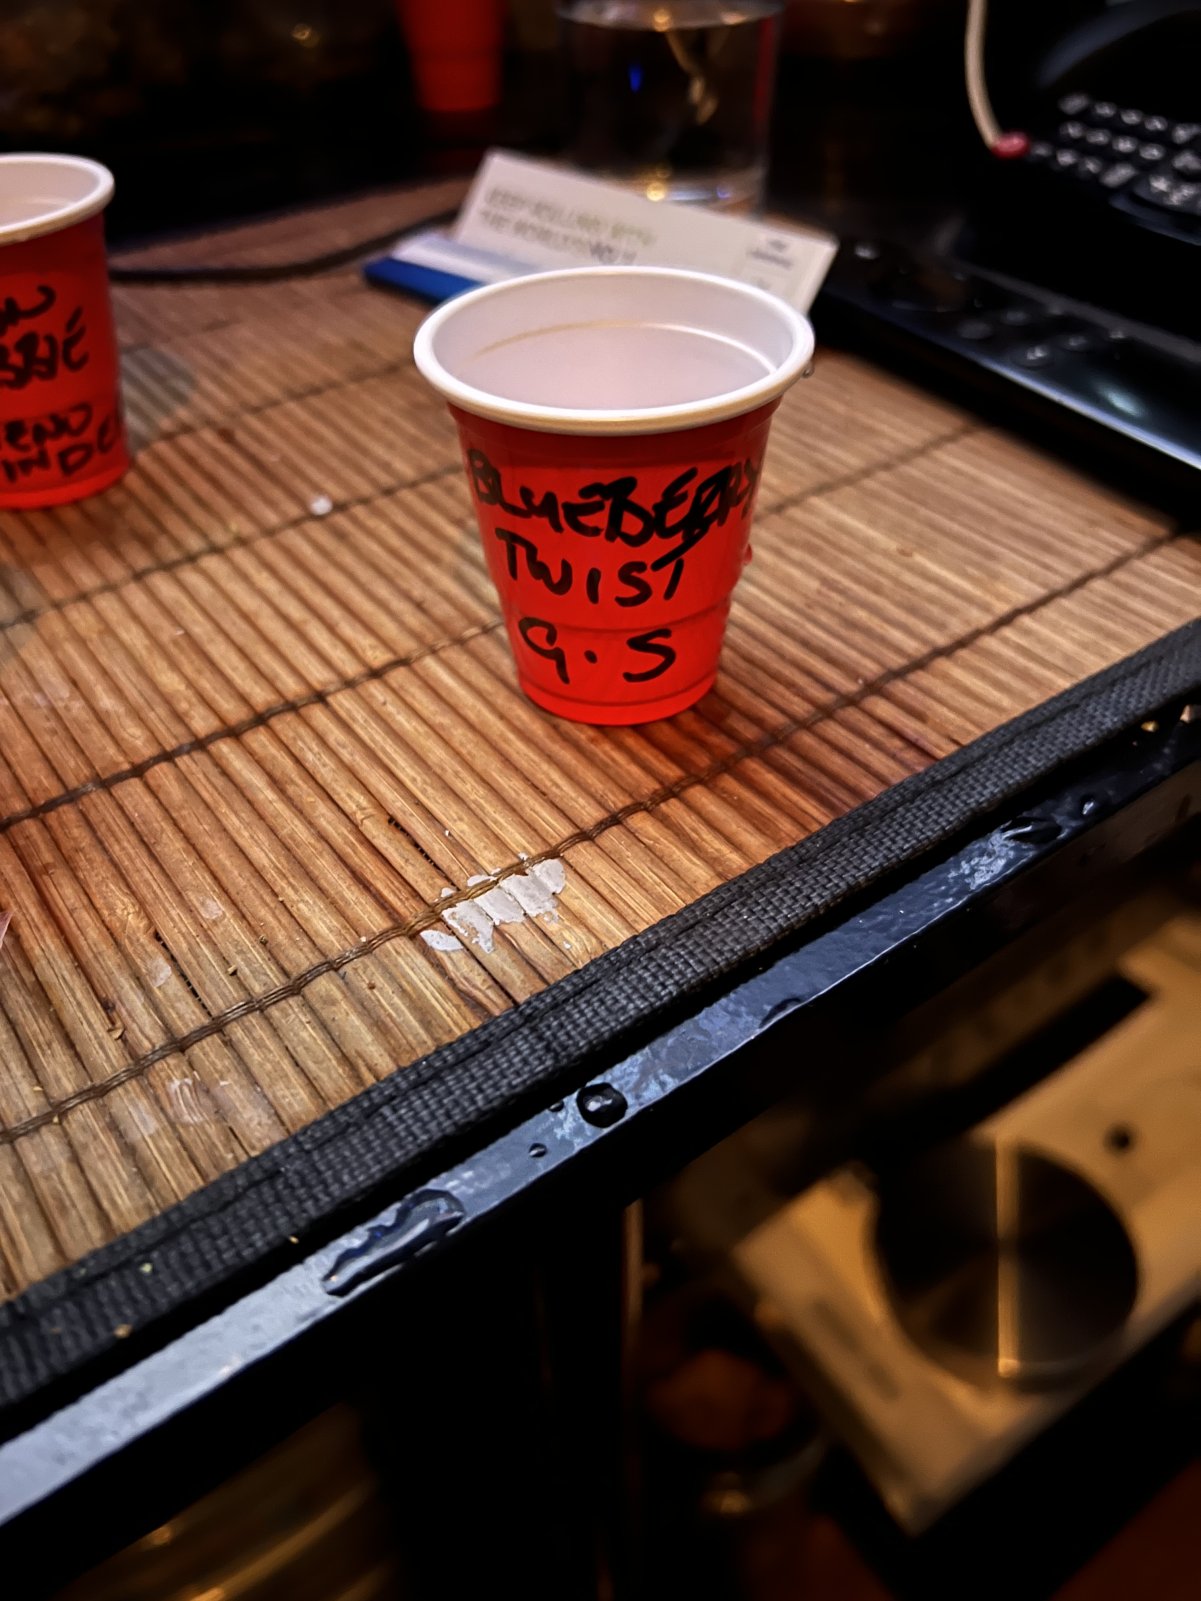 Twist Pong: Beer Pong With a Twist!, HRE-0068